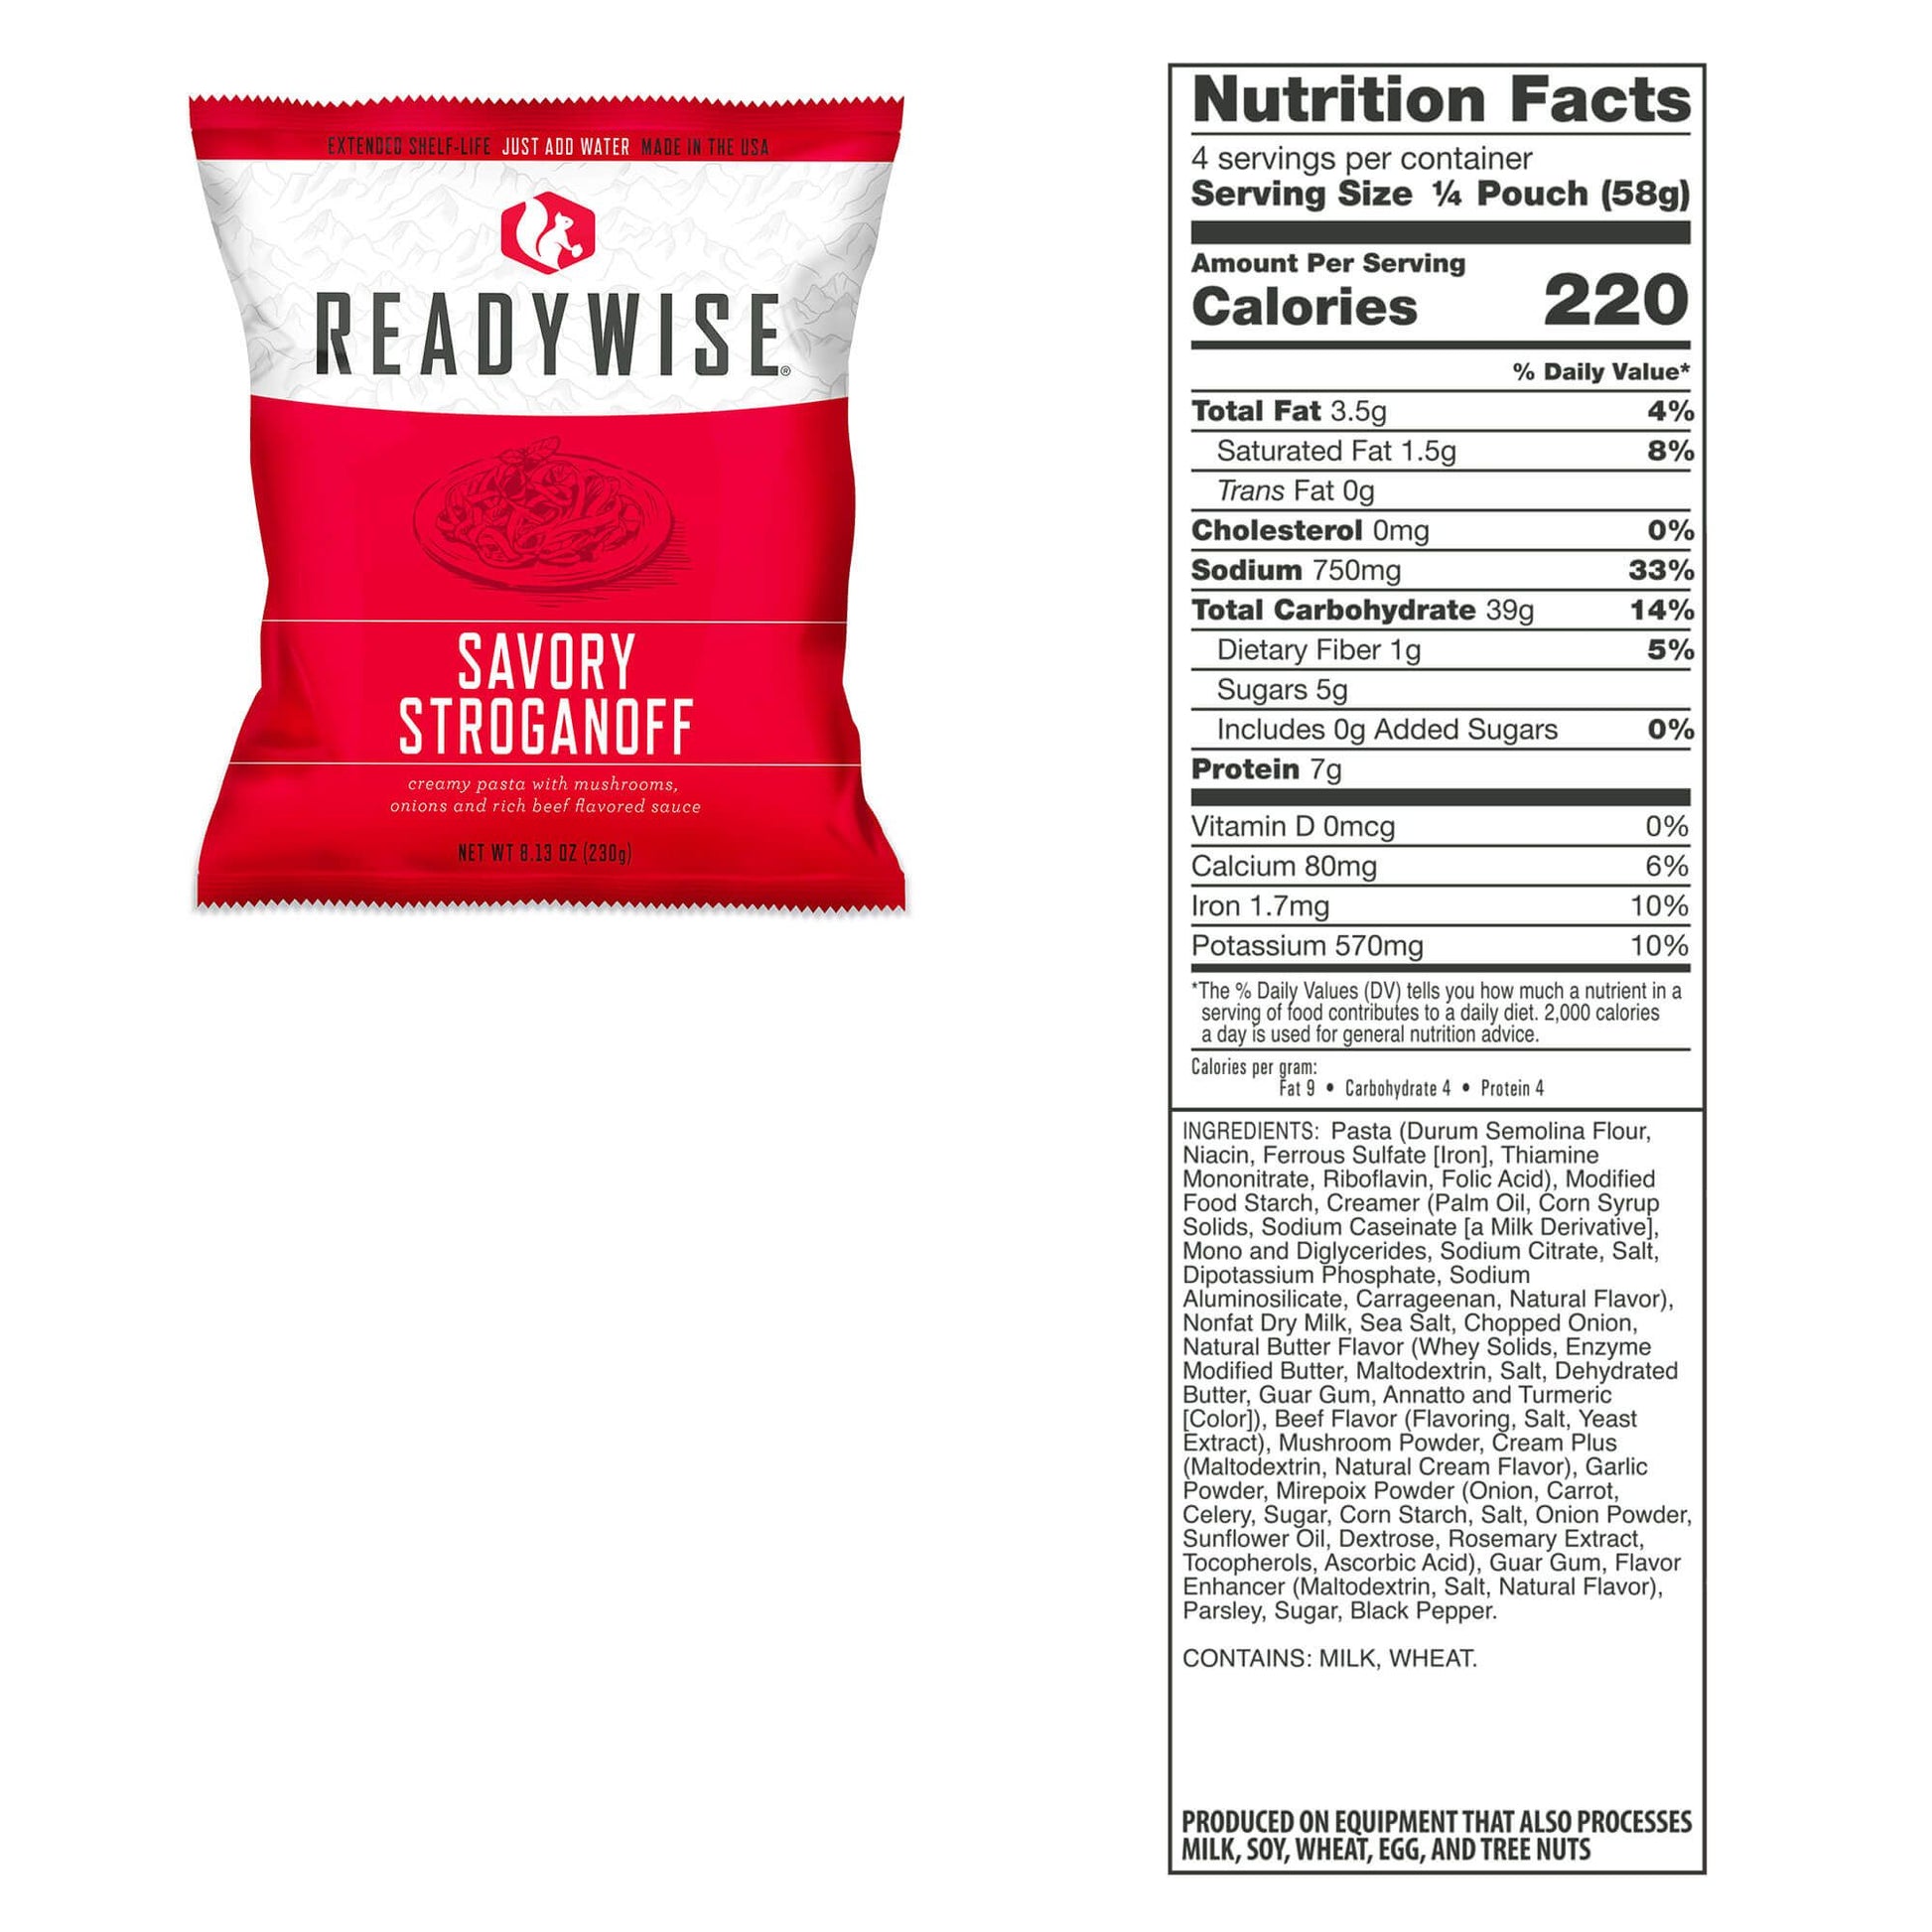 Savory Stroganoff packet with nutritional information